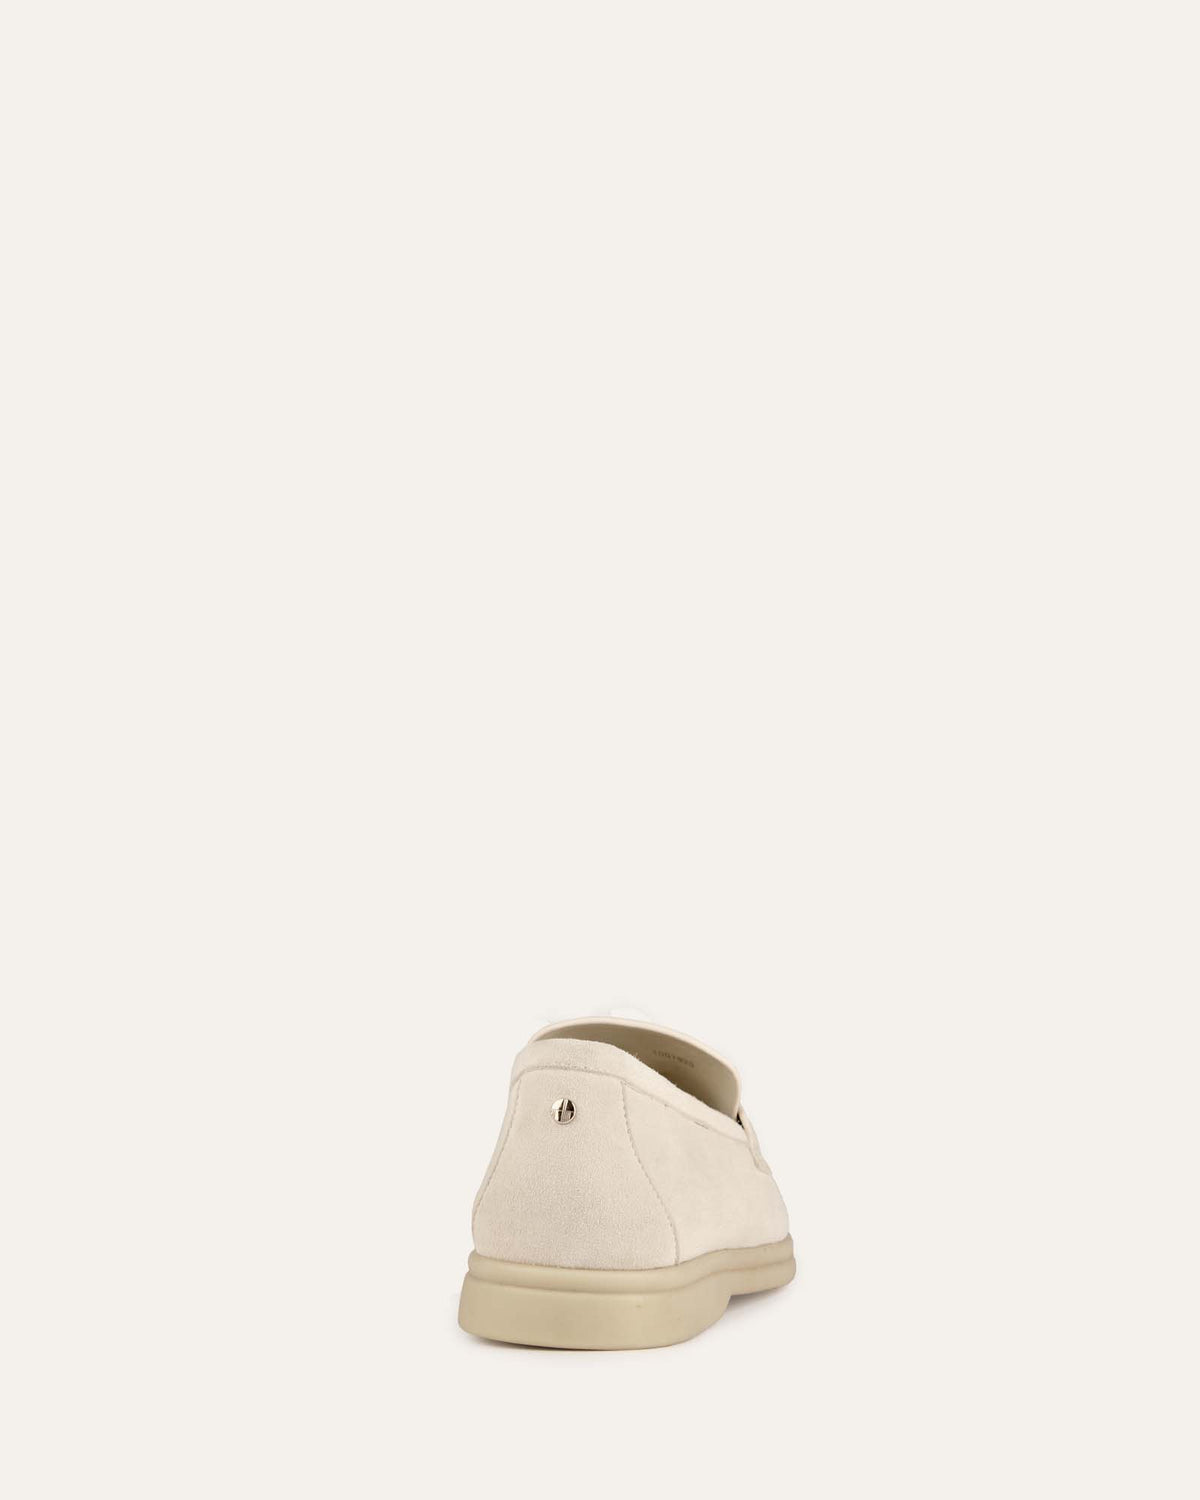 CIRCA LOAFERS SOFT SAND SUEDE